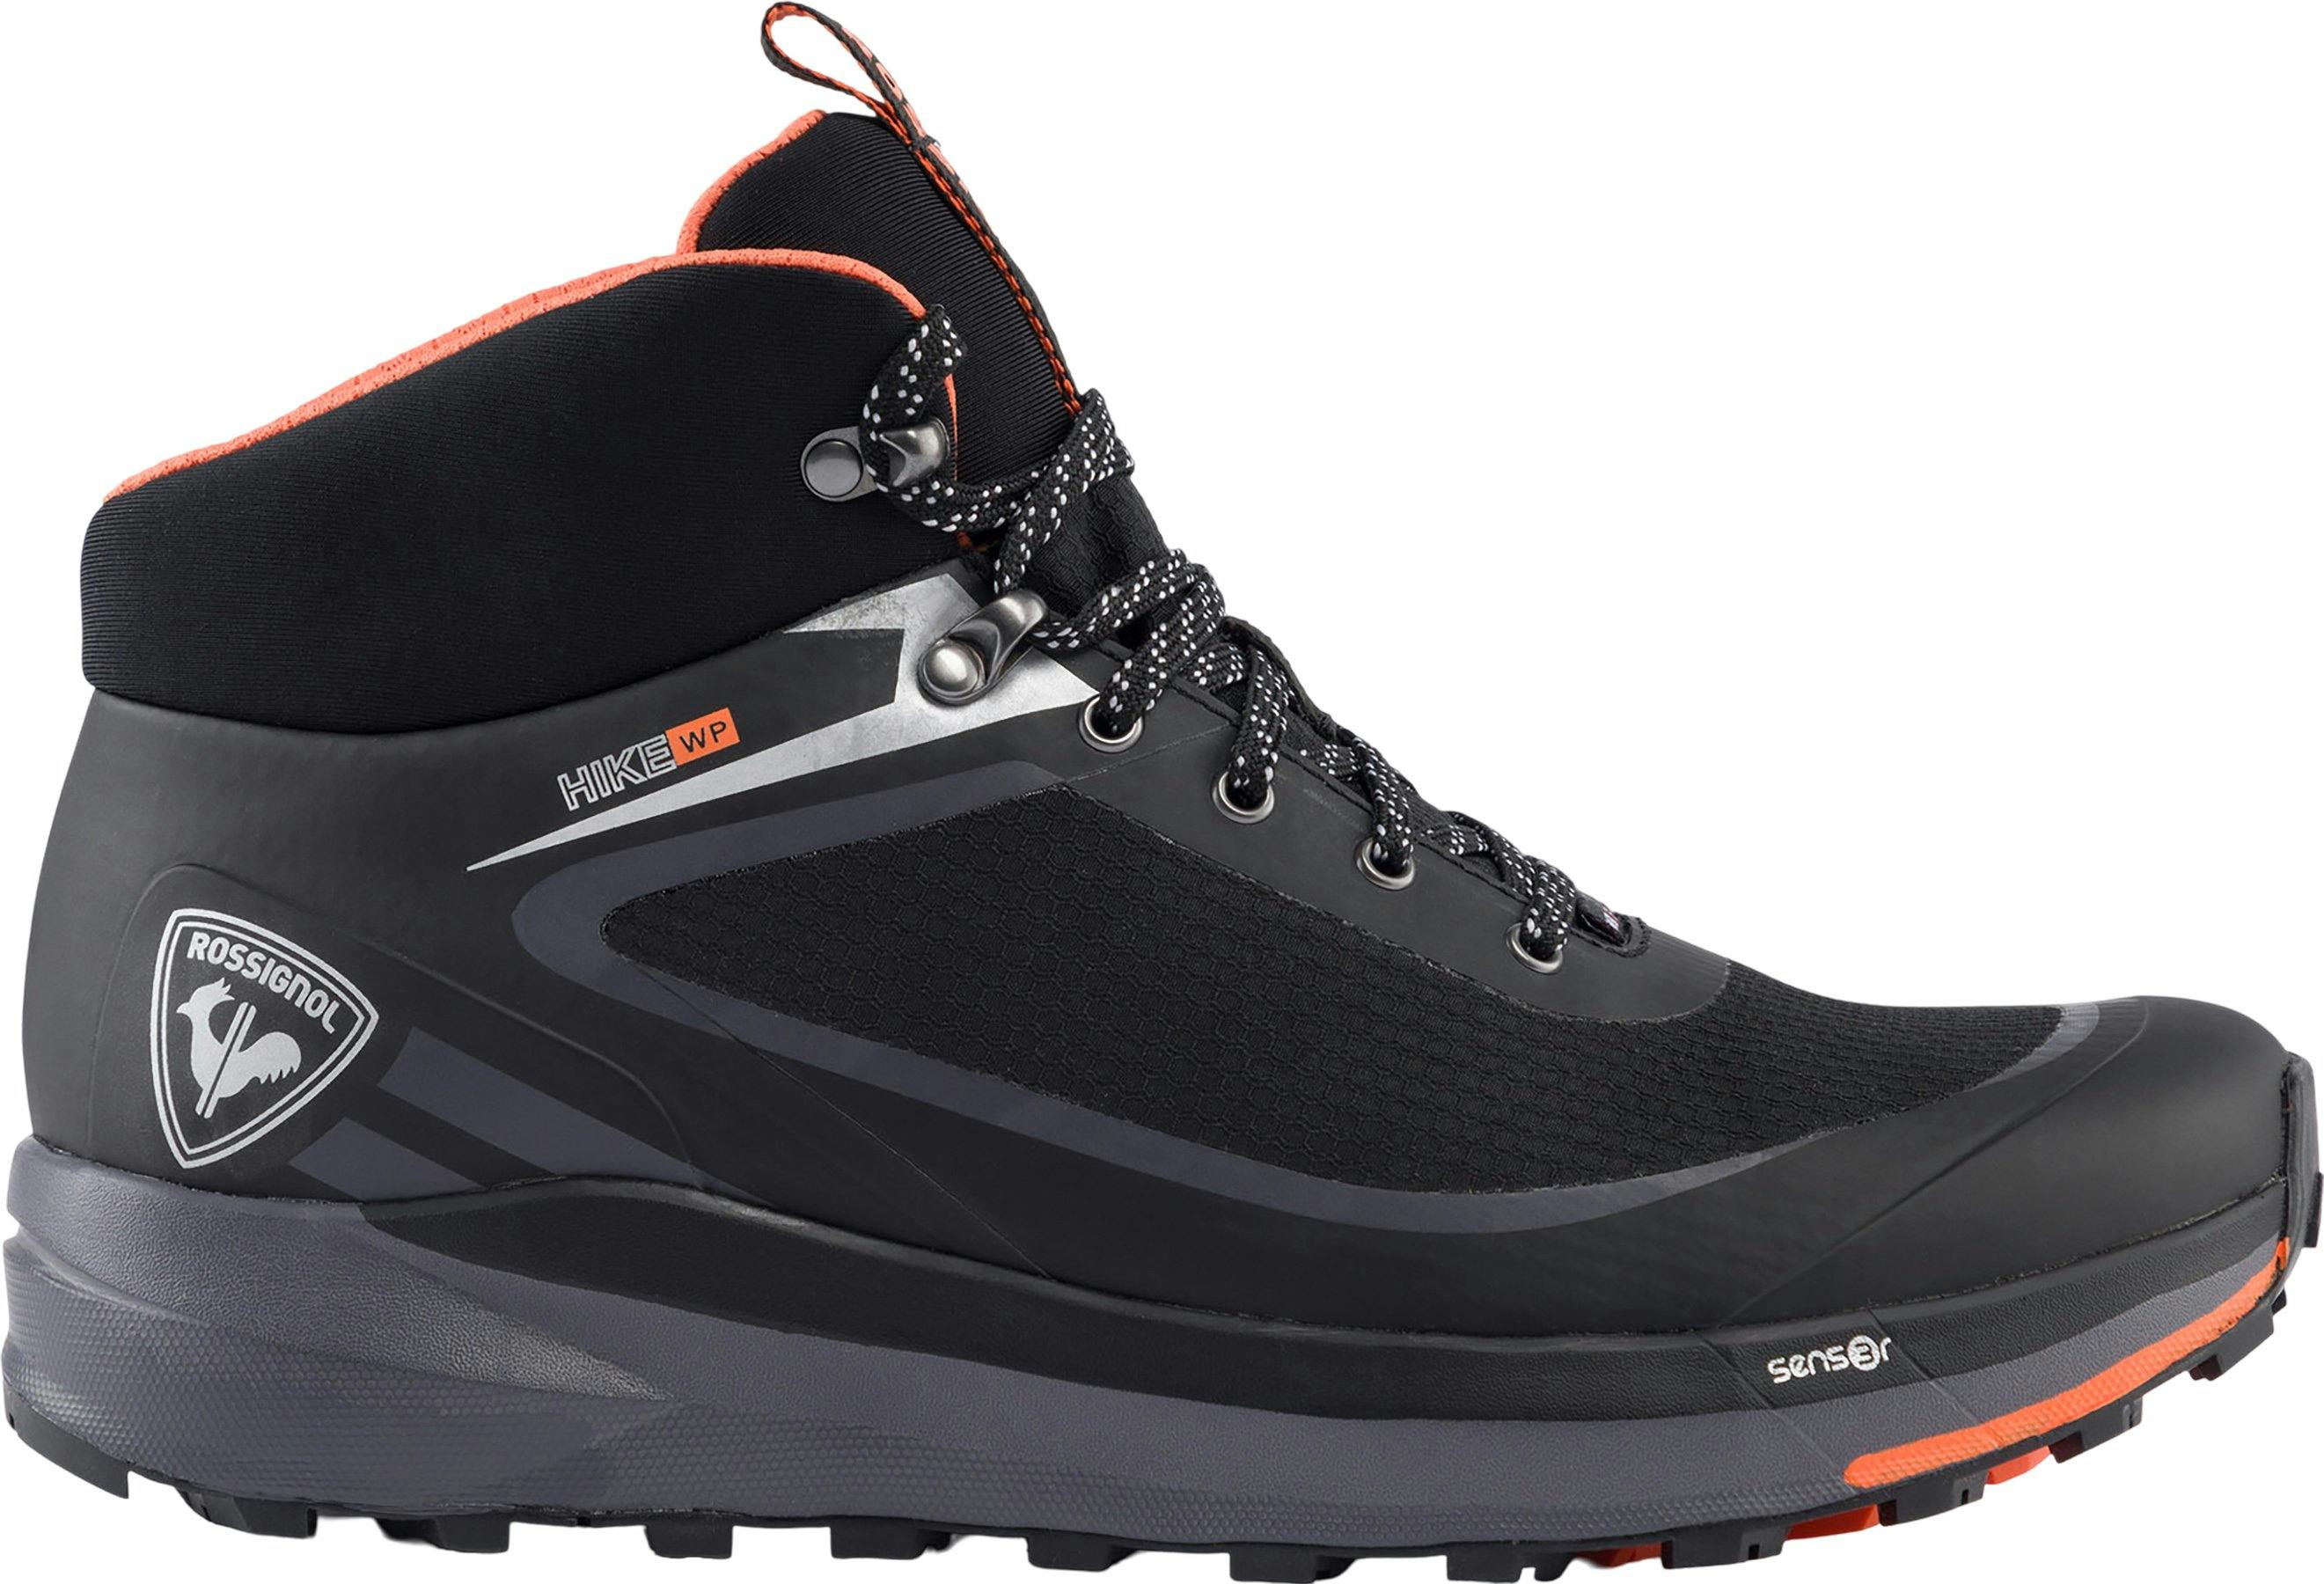 Product image for Skpr Waterproof Hiking Boot - Women's